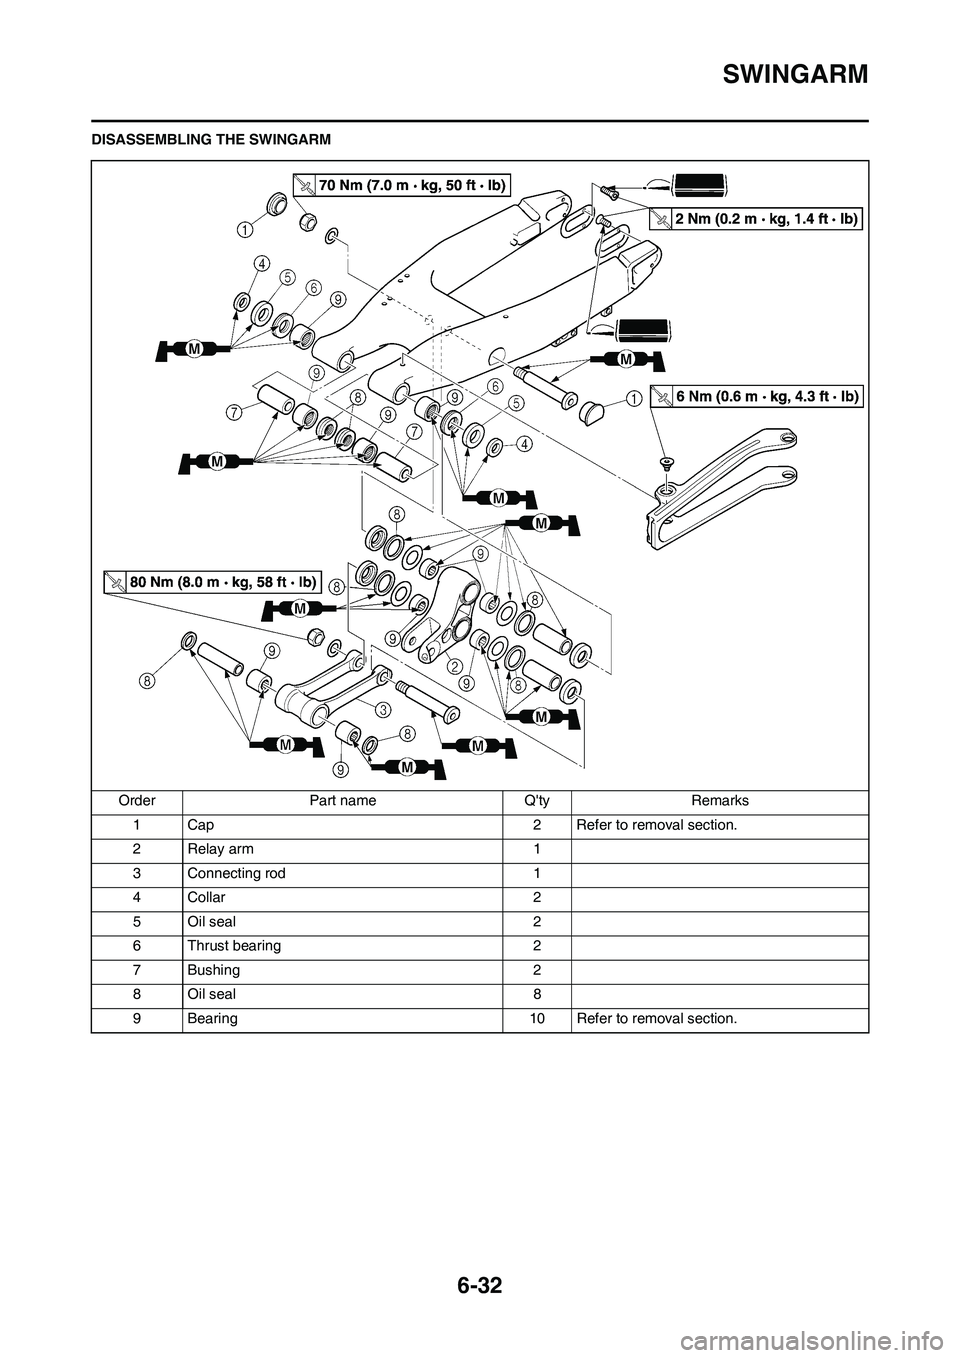 YAMAHA WR 450F 2011  Owners Manual 6-32
SWINGARM
DISASSEMBLING THE SWINGARM
Order Part name Qty Remarks
1 Cap 2 Refer to removal section.
2 Relay arm 1
3 Connecting rod 1
4 Collar 2
5 Oil seal 2
6 Thrust bearing 2
7 Bushing 2
8 Oil se